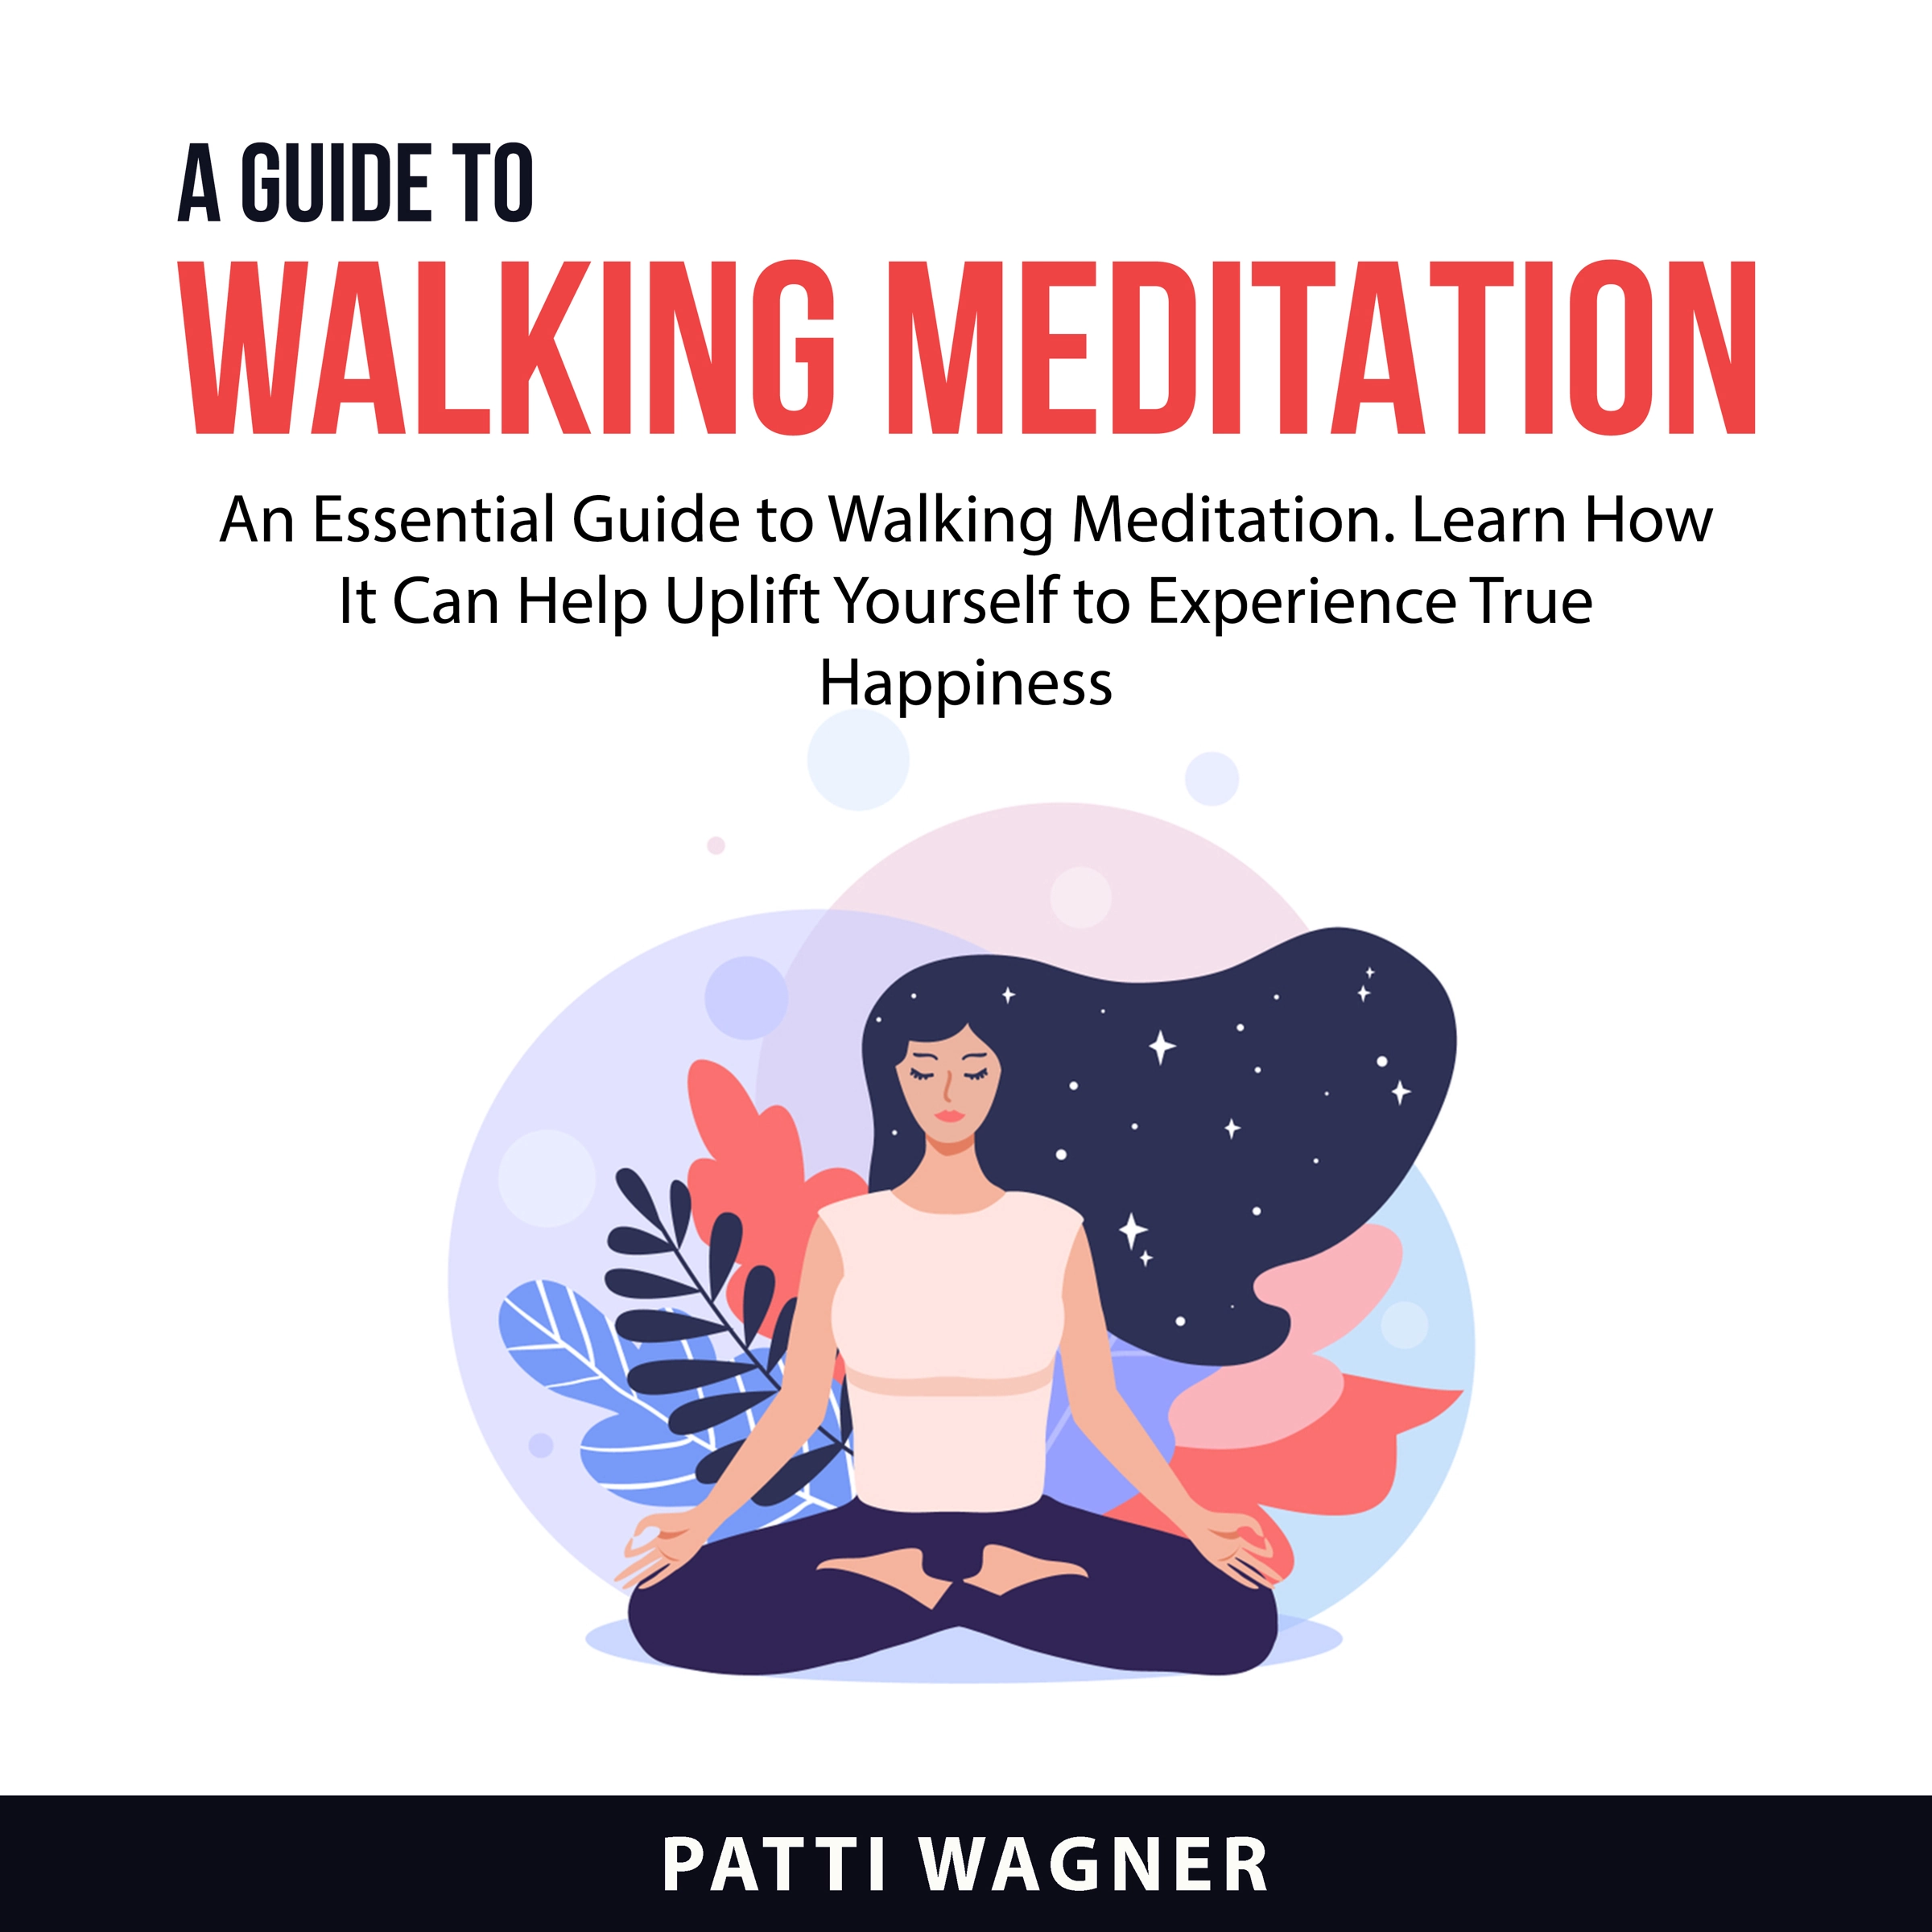 A Guide to Walking Meditation Audiobook by Patti Wagner